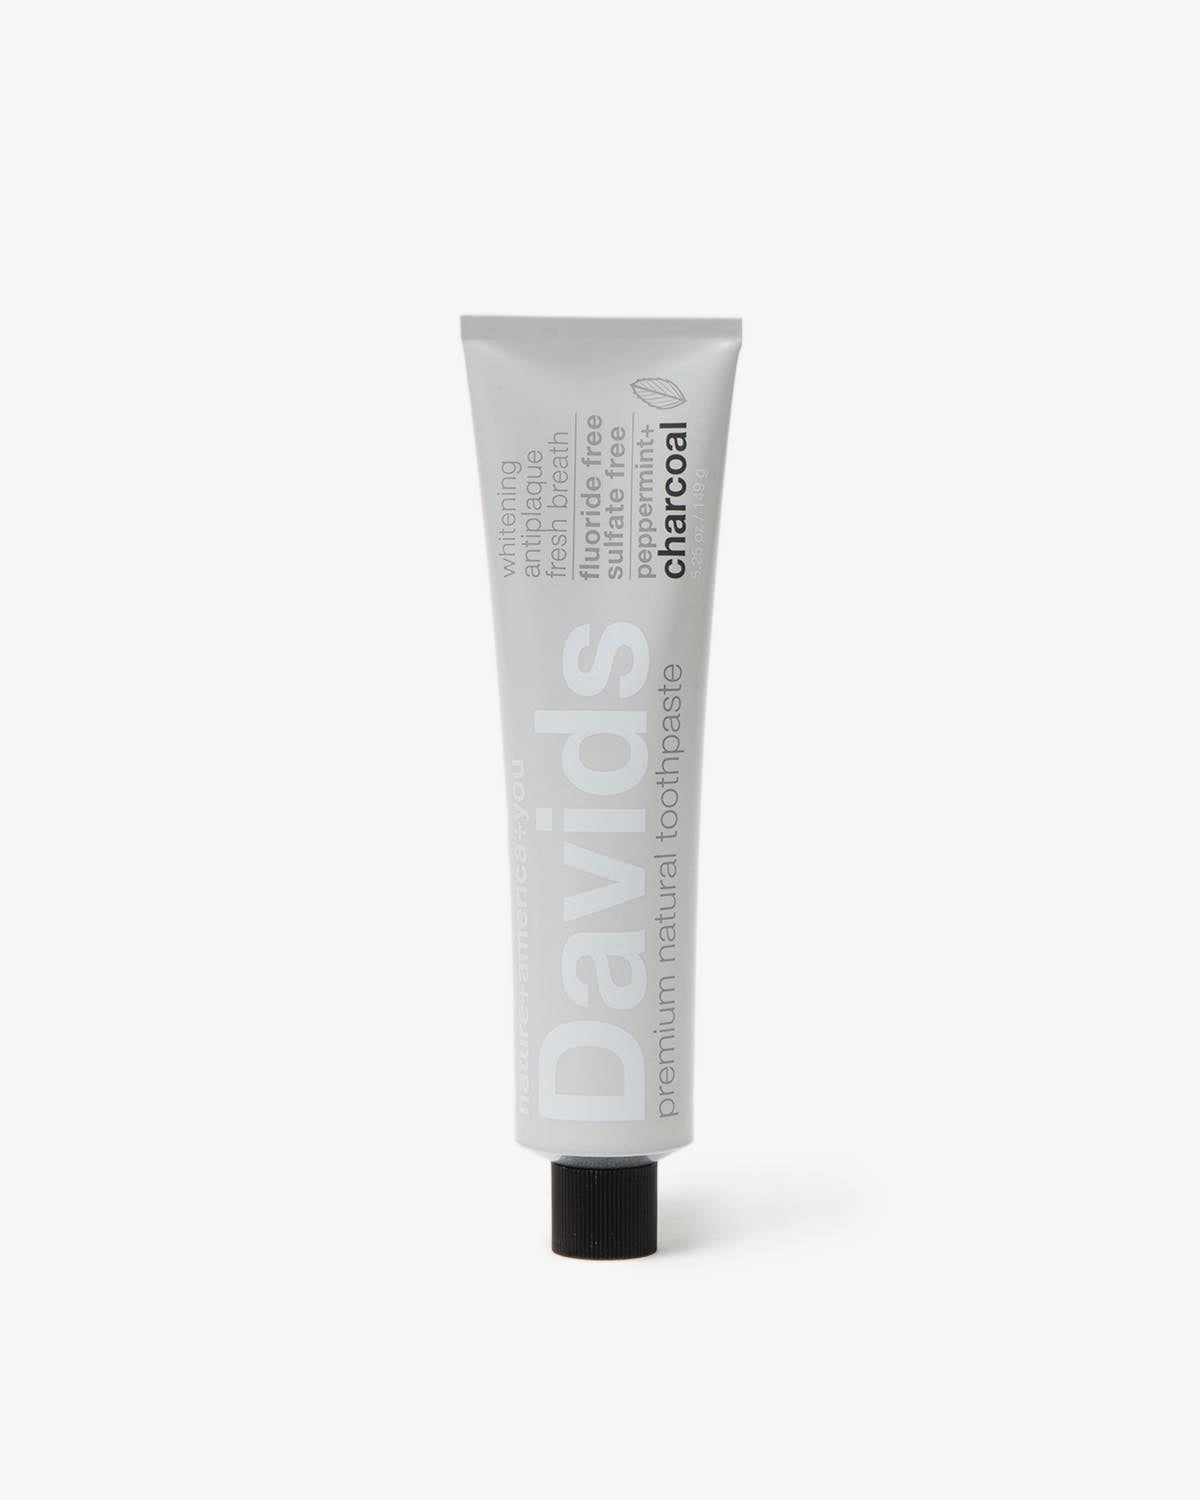 WHITENING TOOTHPASTE / CHARCOAL